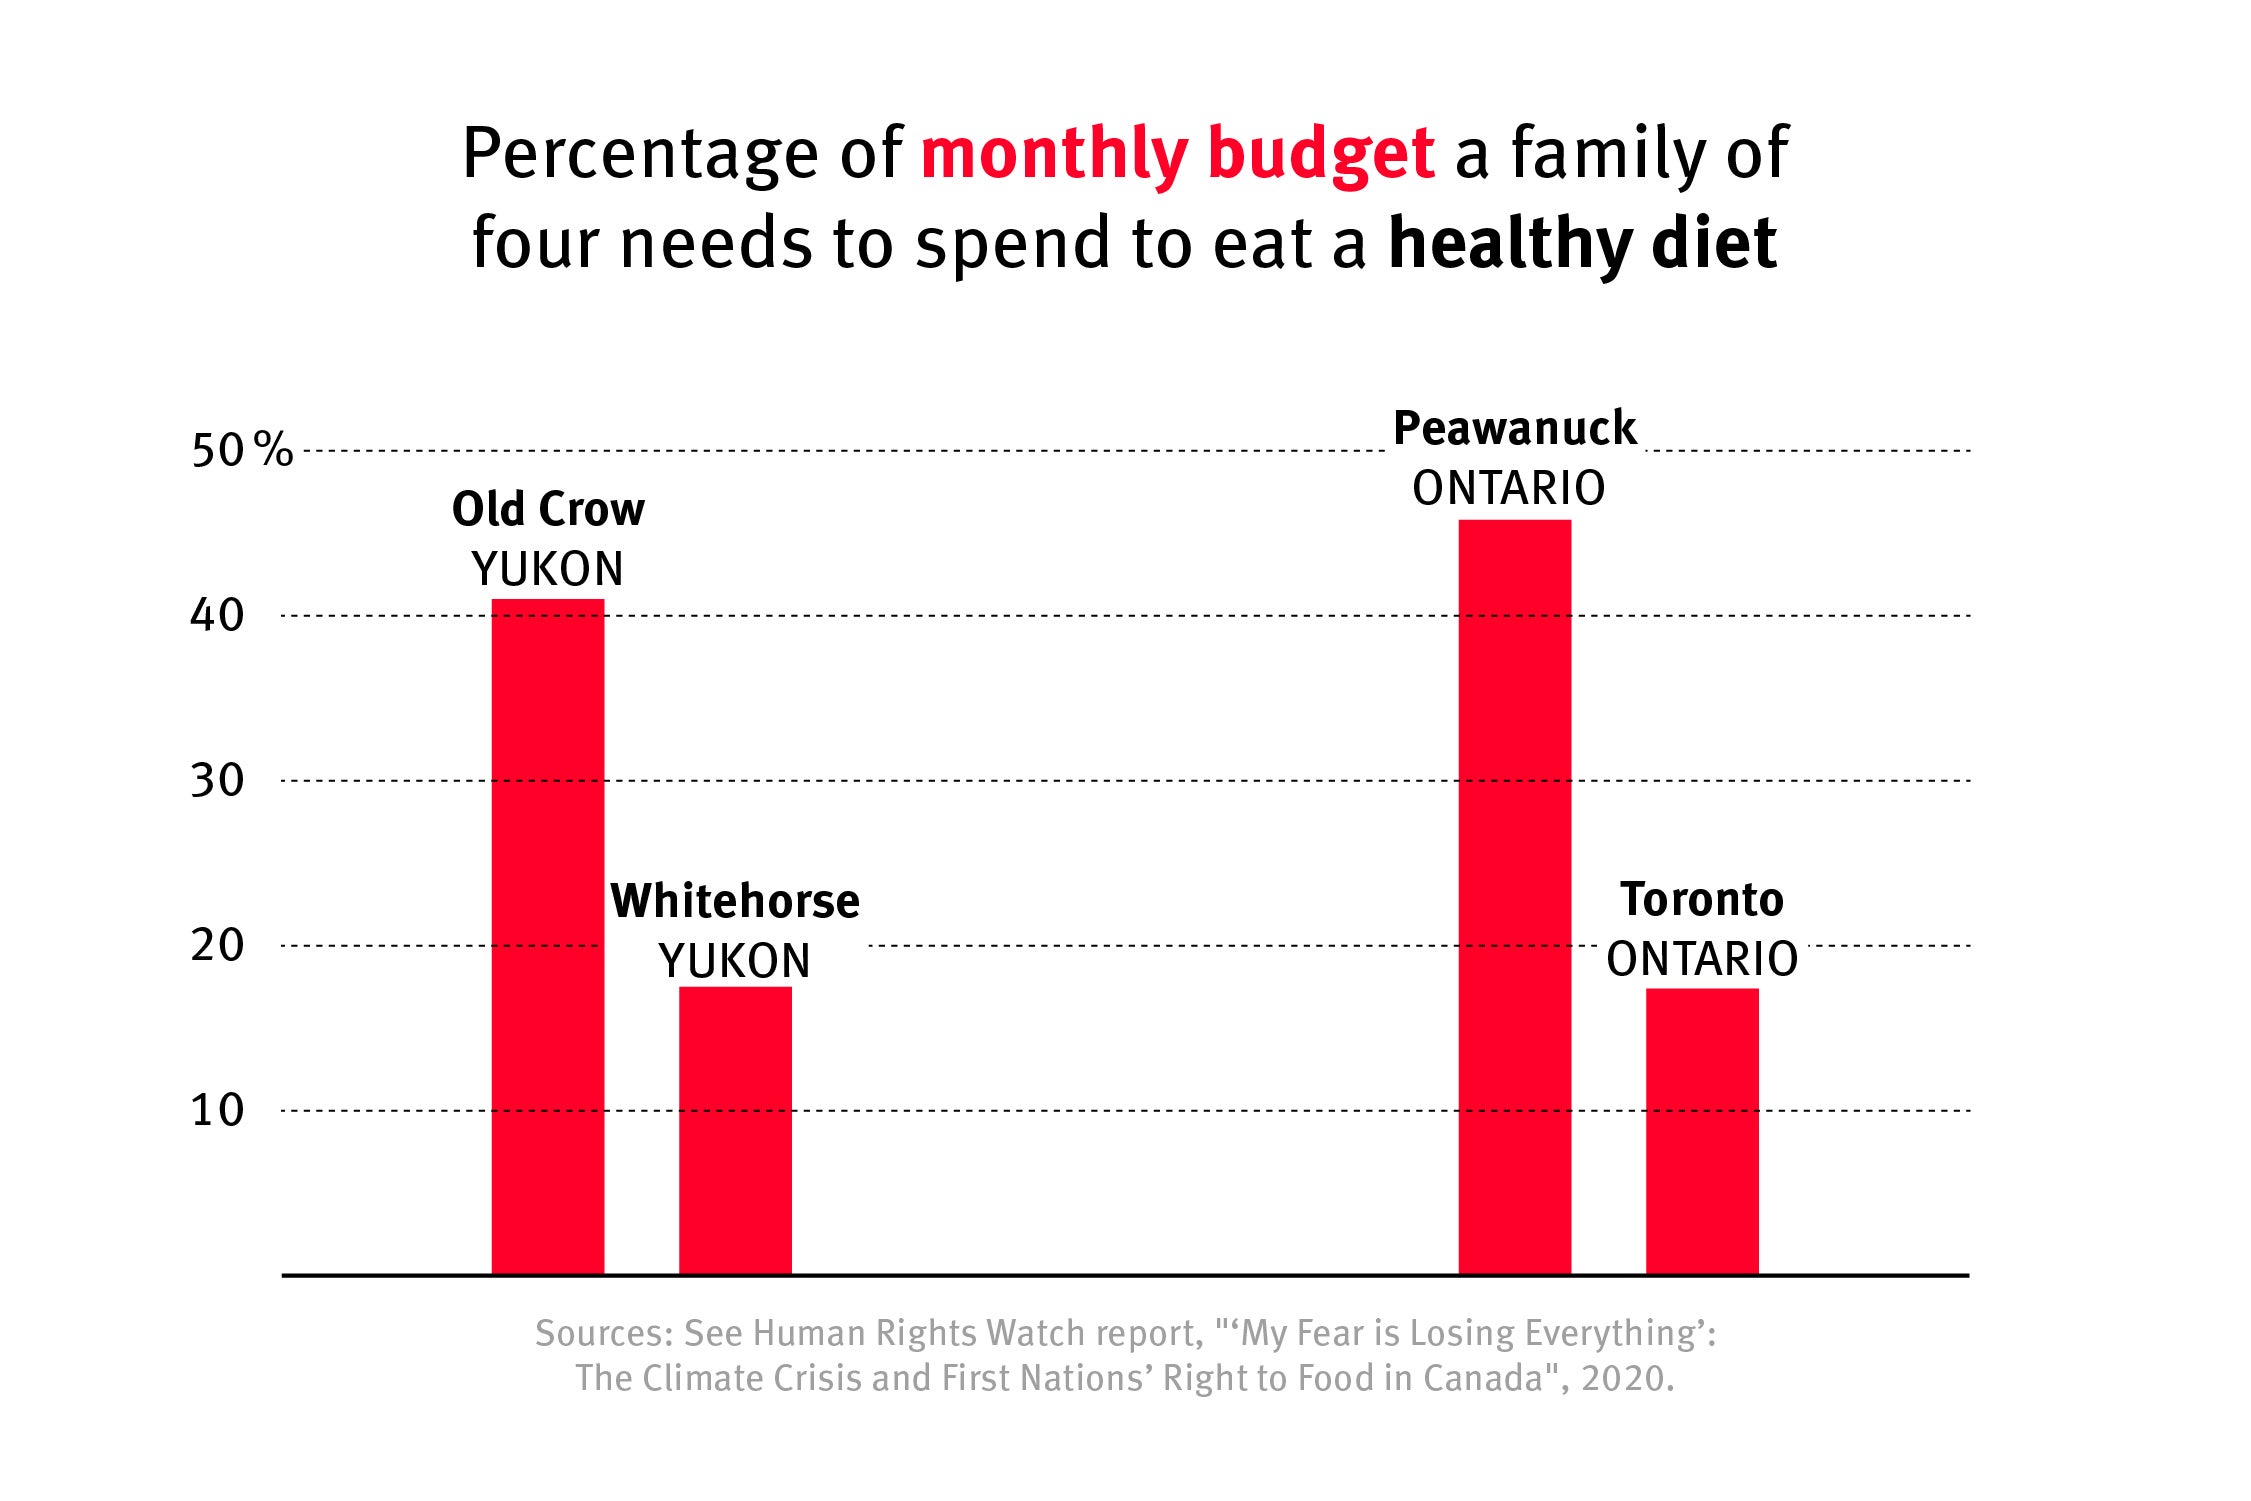 Bar graph comparing the percentage of monthly budget a family of four needs to spend to eat a health diet in Yukon and Ontario